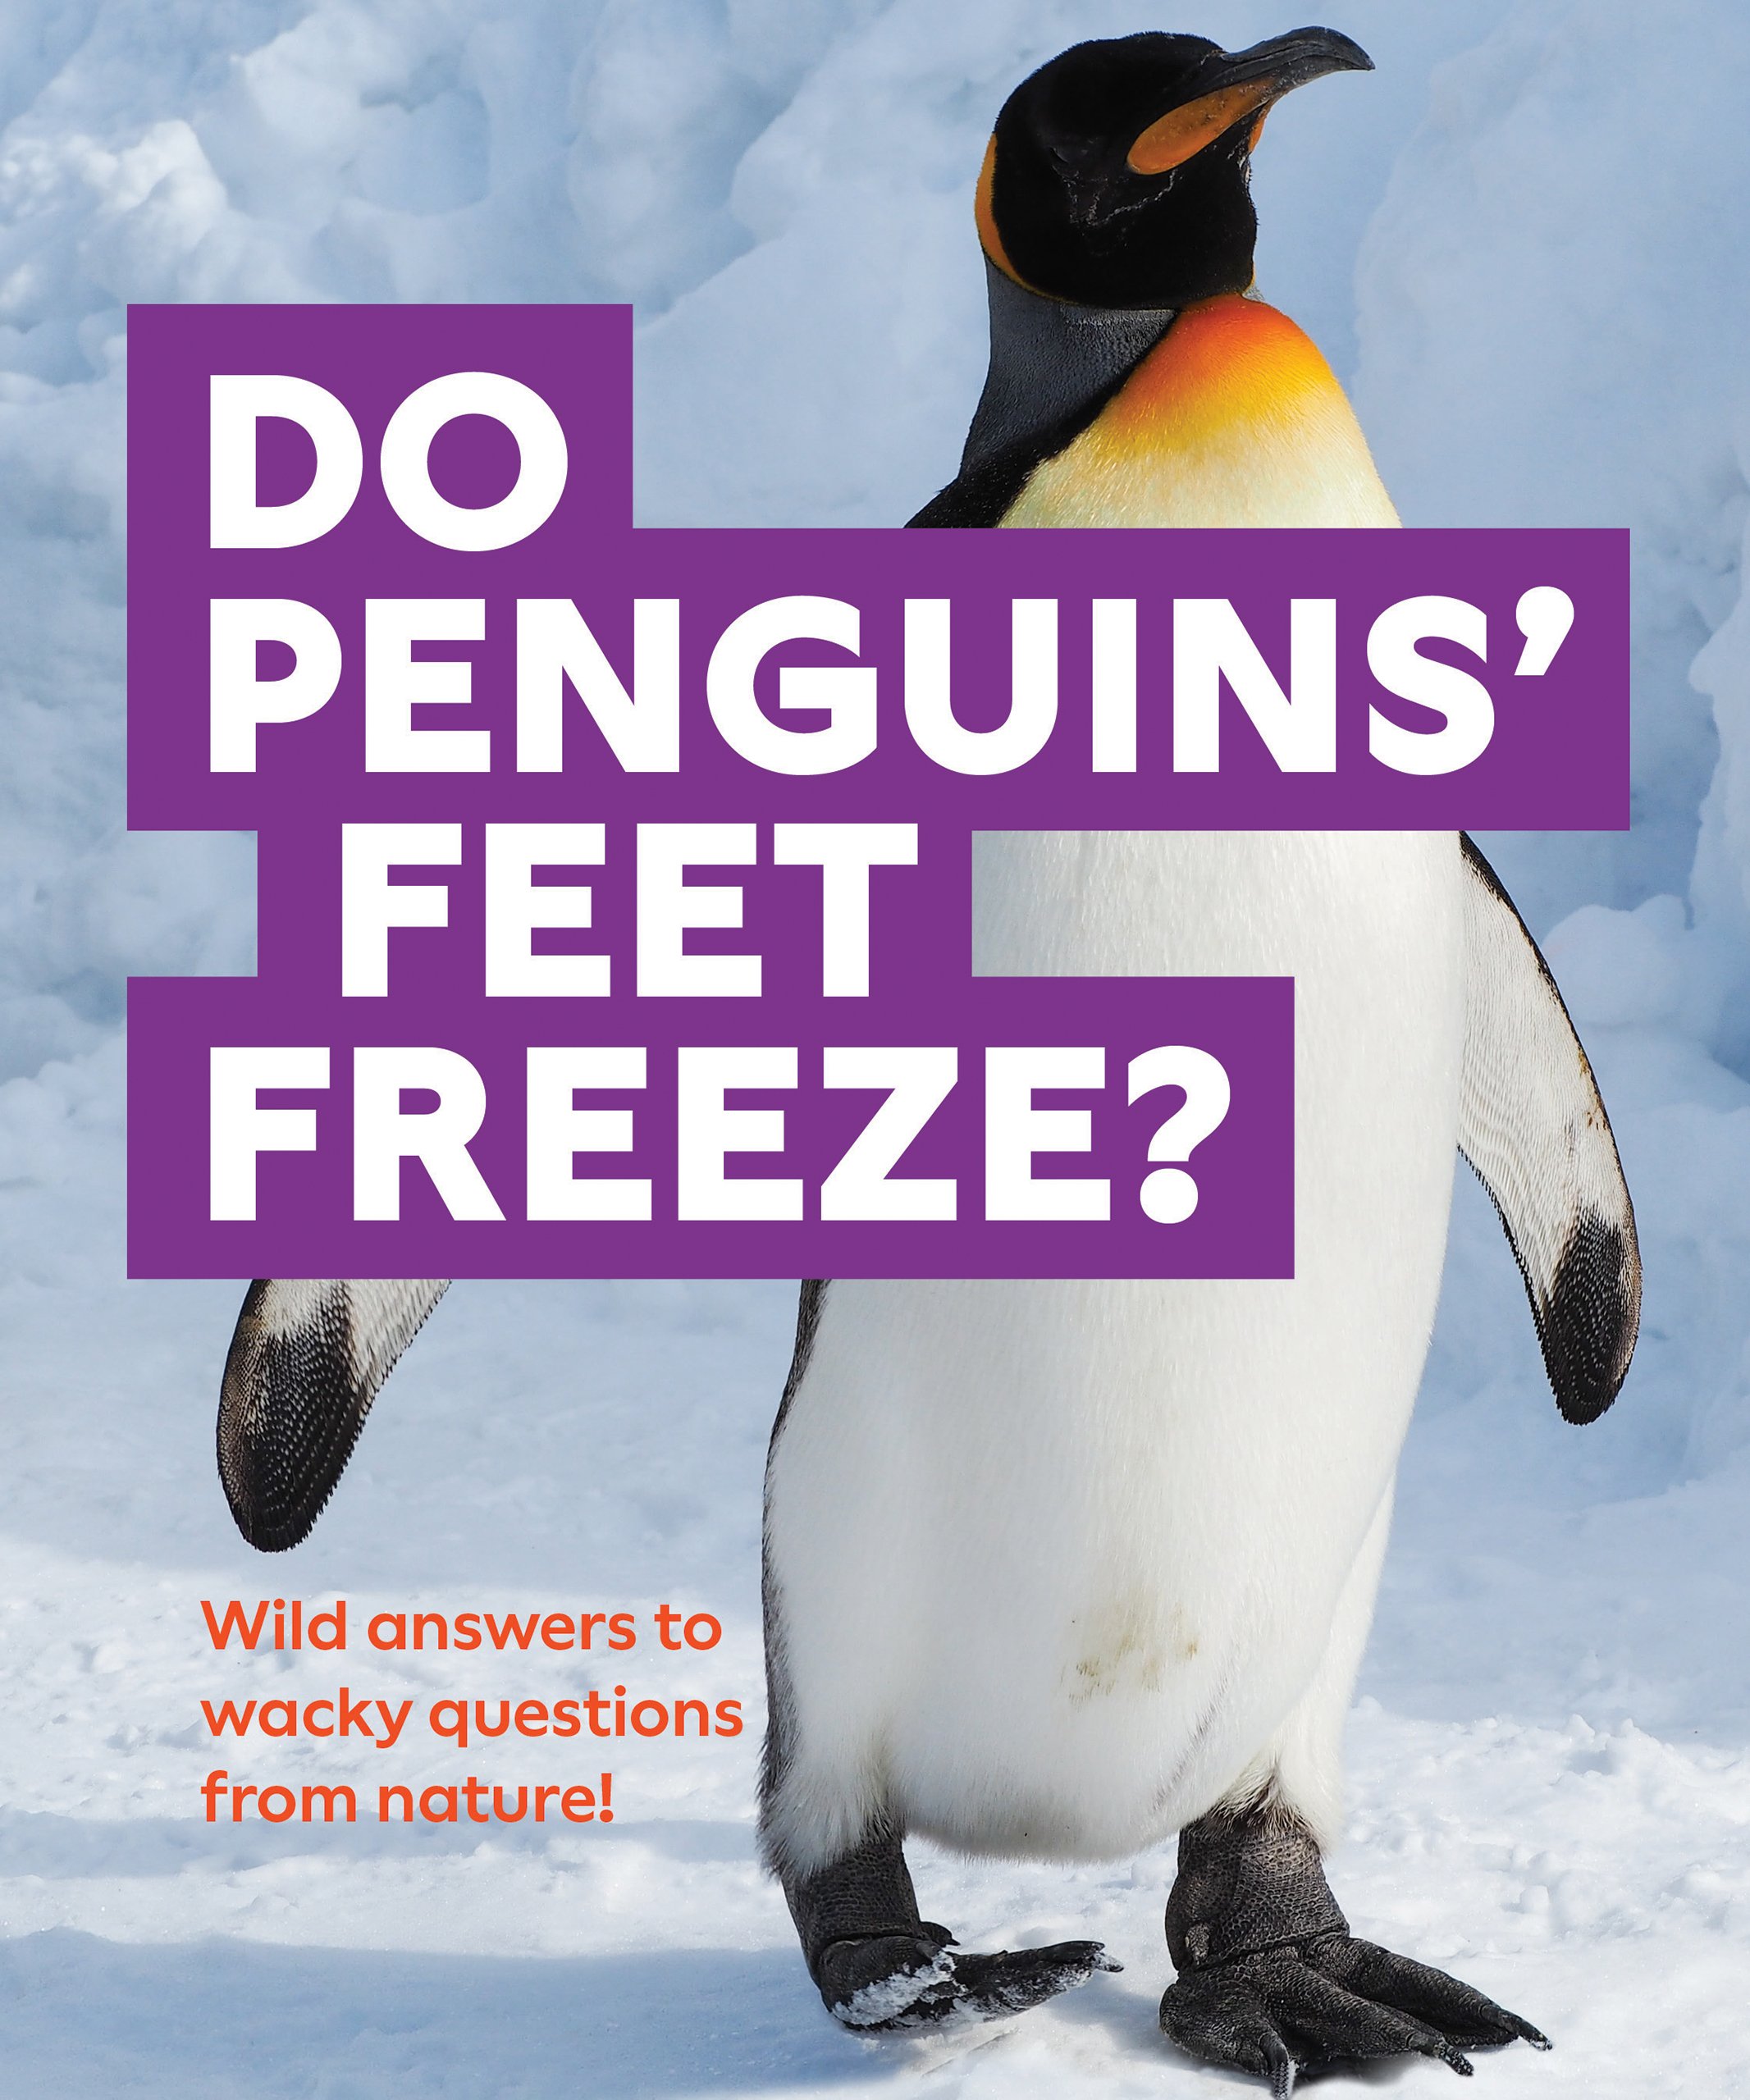 Do Penguins’ Feet Freeze? by Natural History Museum, London